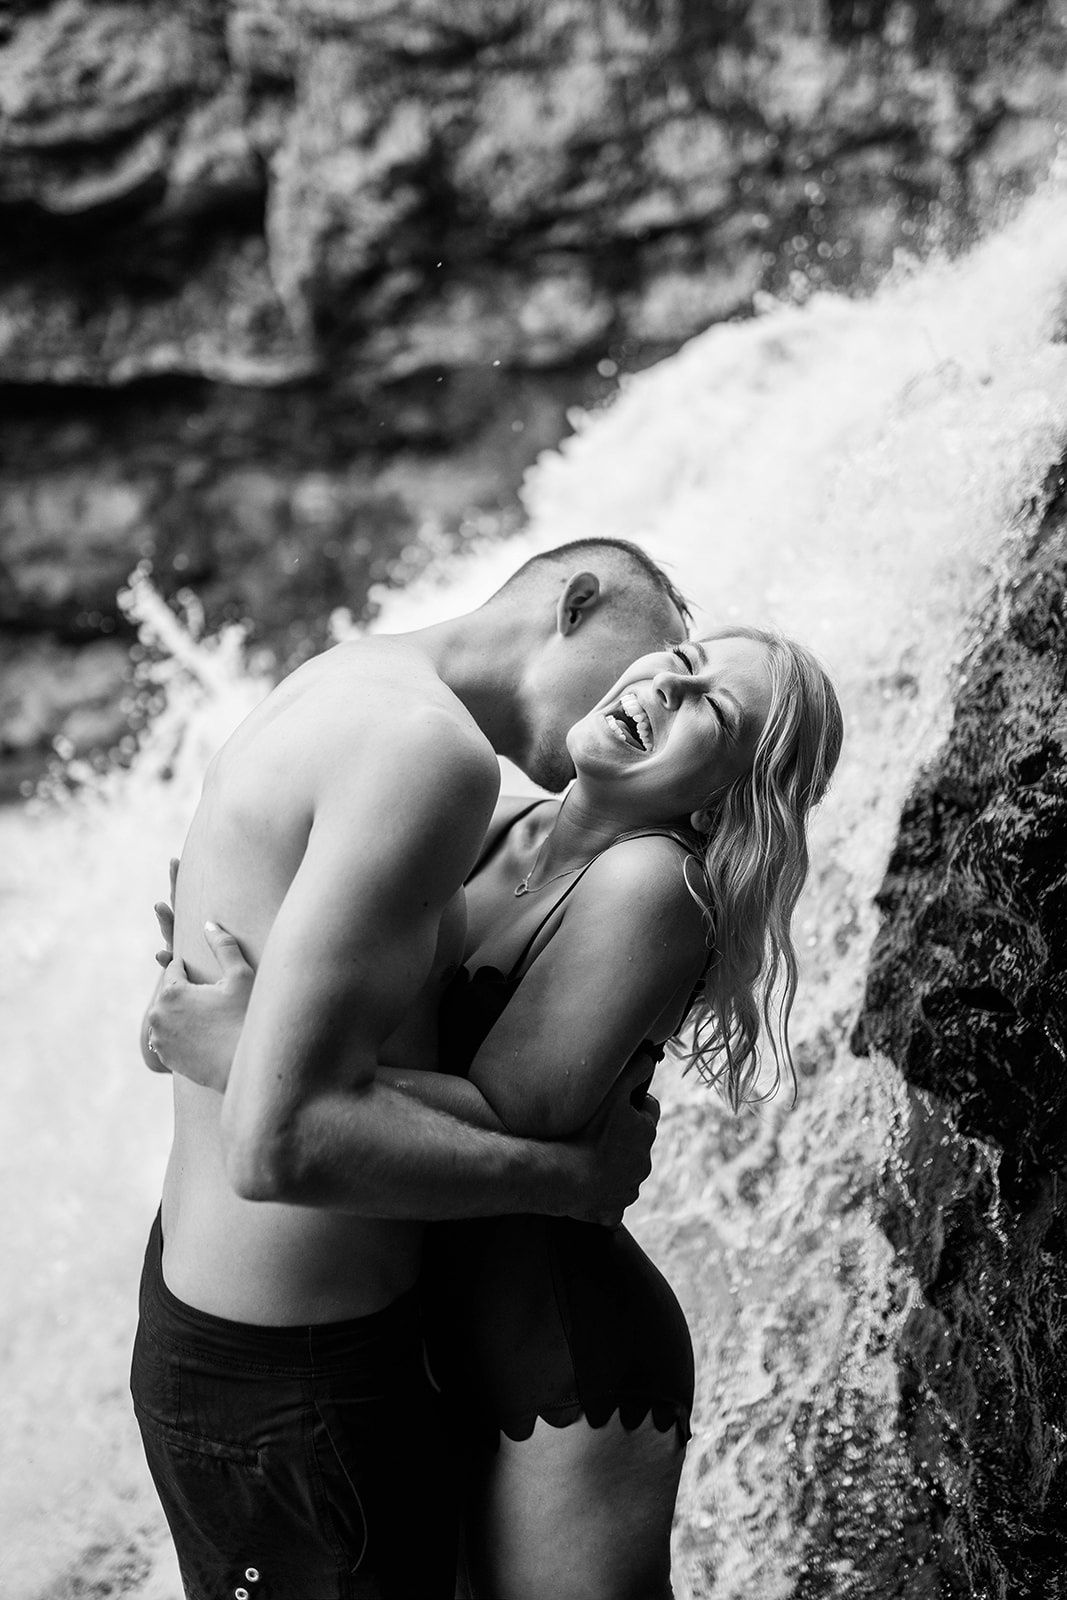 A romantic moment between an engaged couple as the man kisses the woman's neck affectionately under a cascading waterfall.